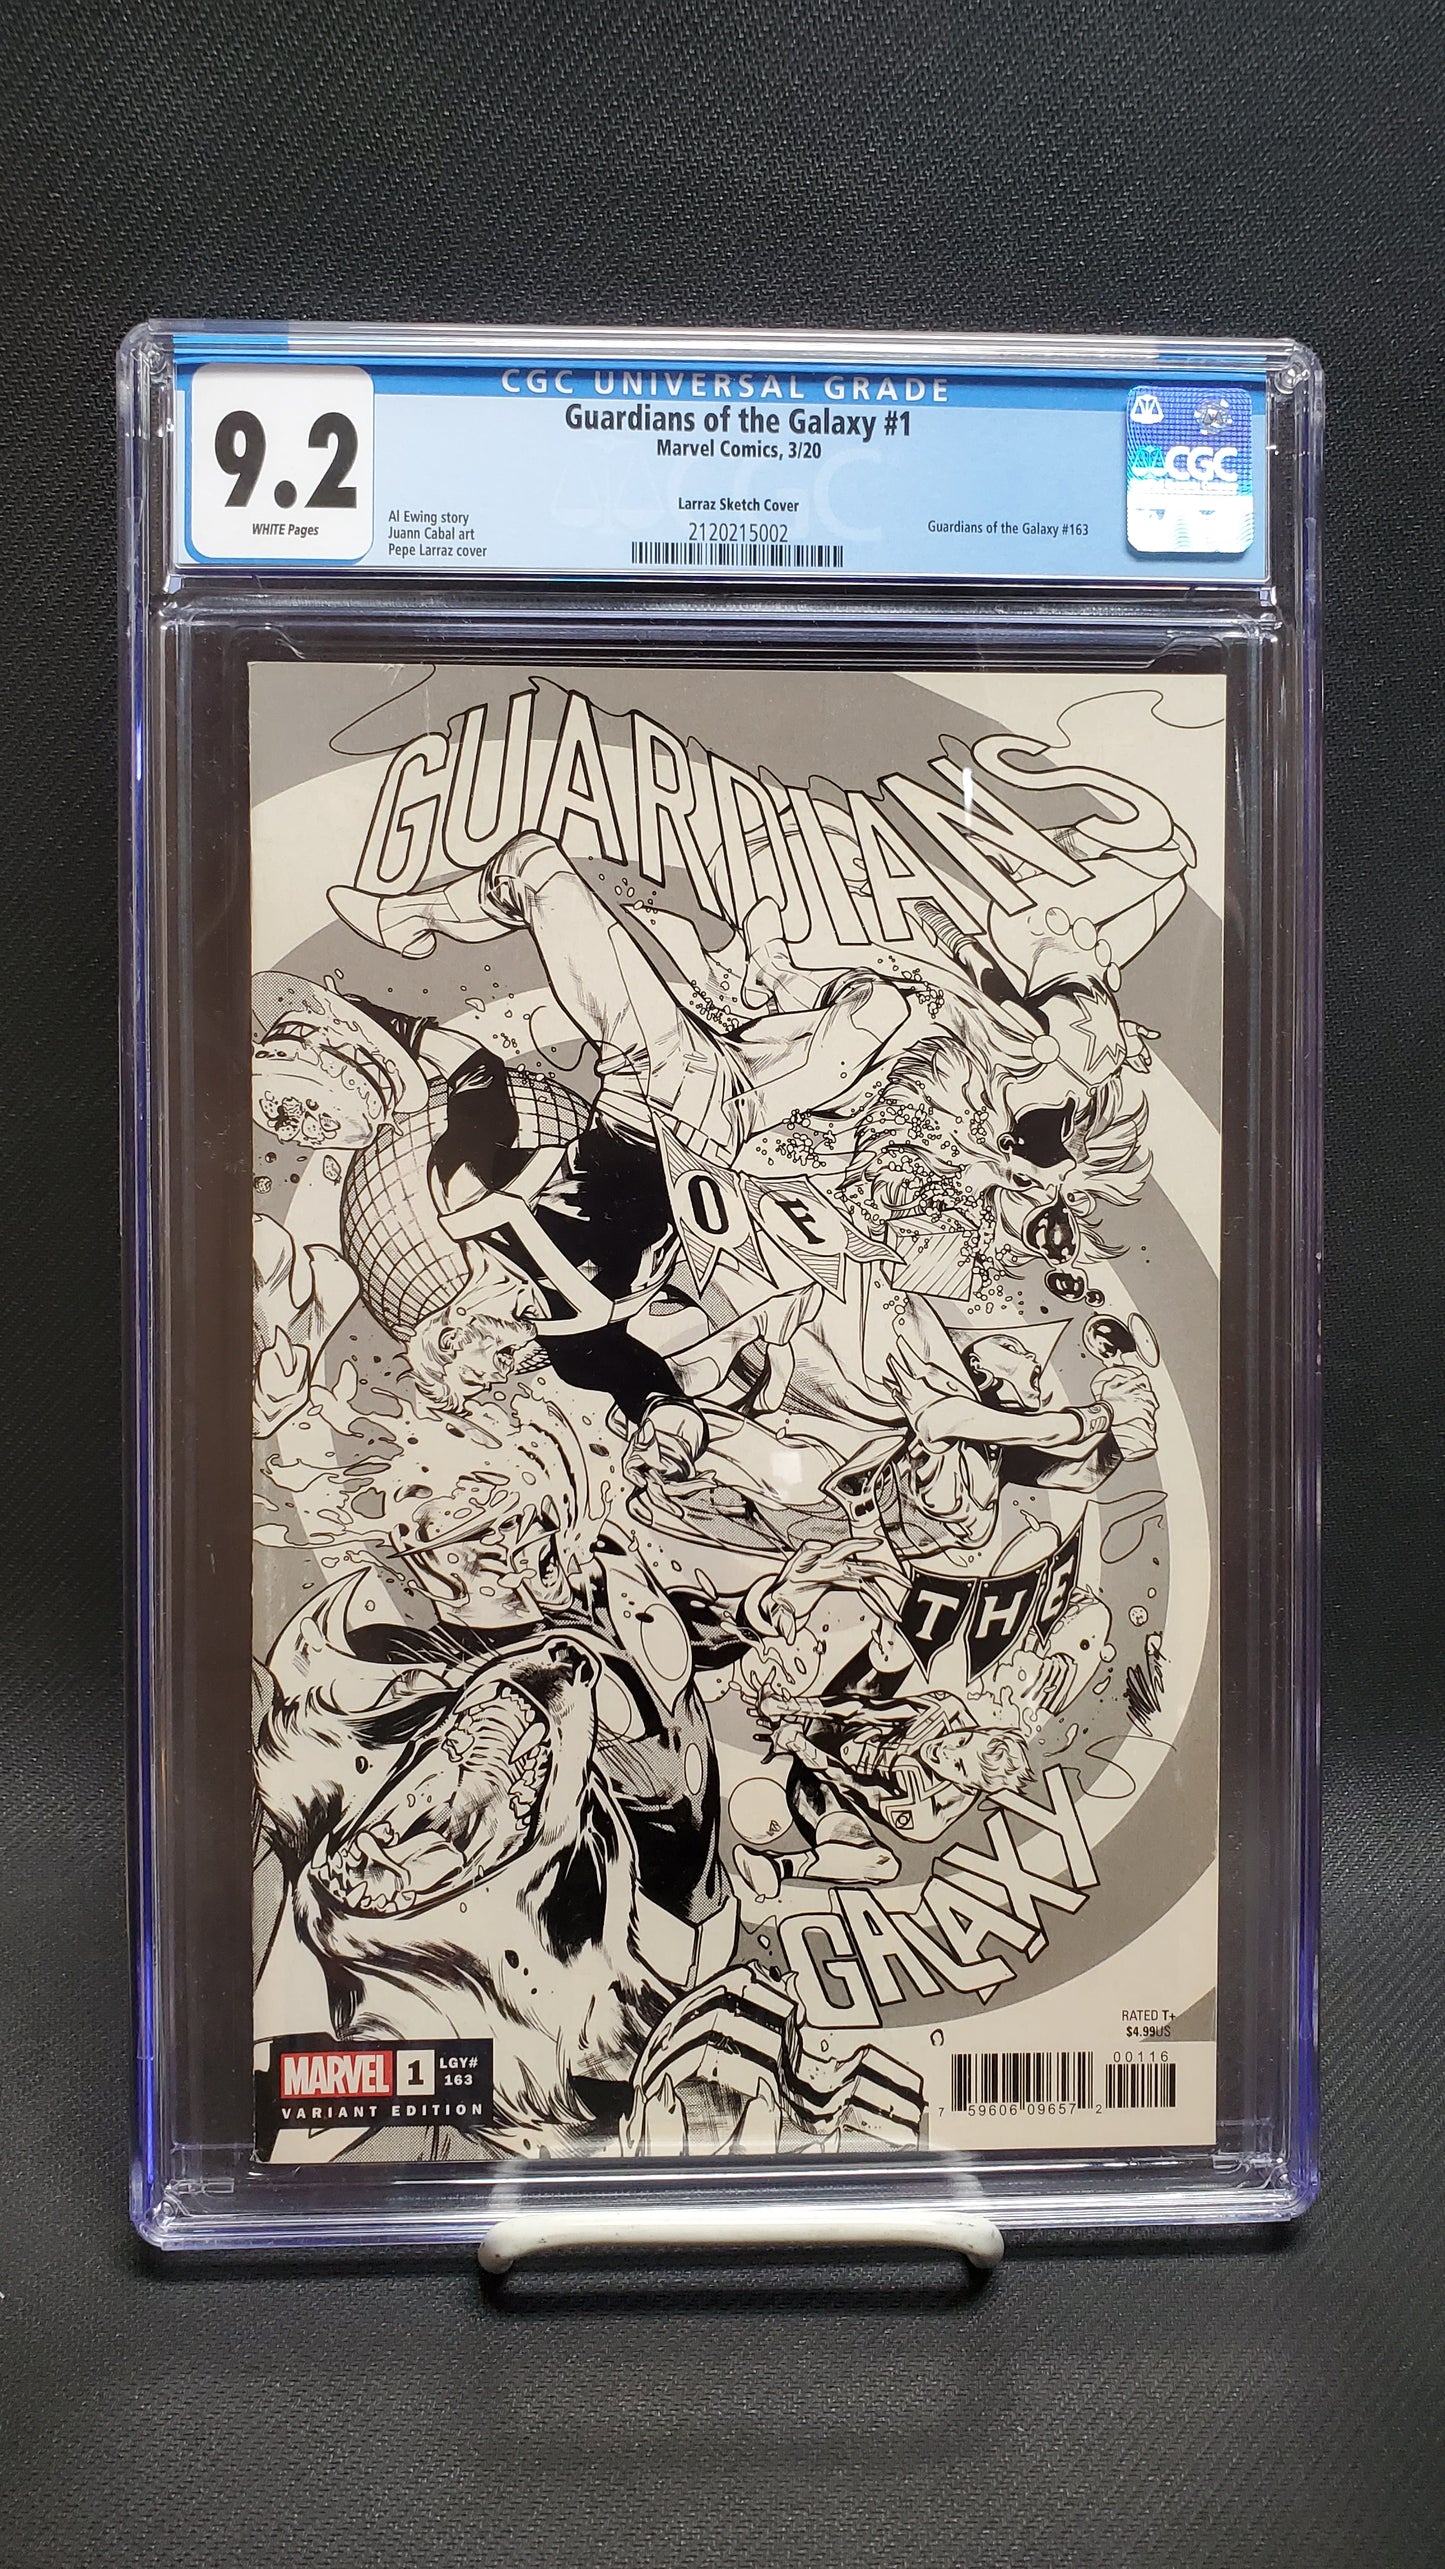 Guardians of the Galaxy #1Larraz Sketch cover LGY #163 - CGC 9.2